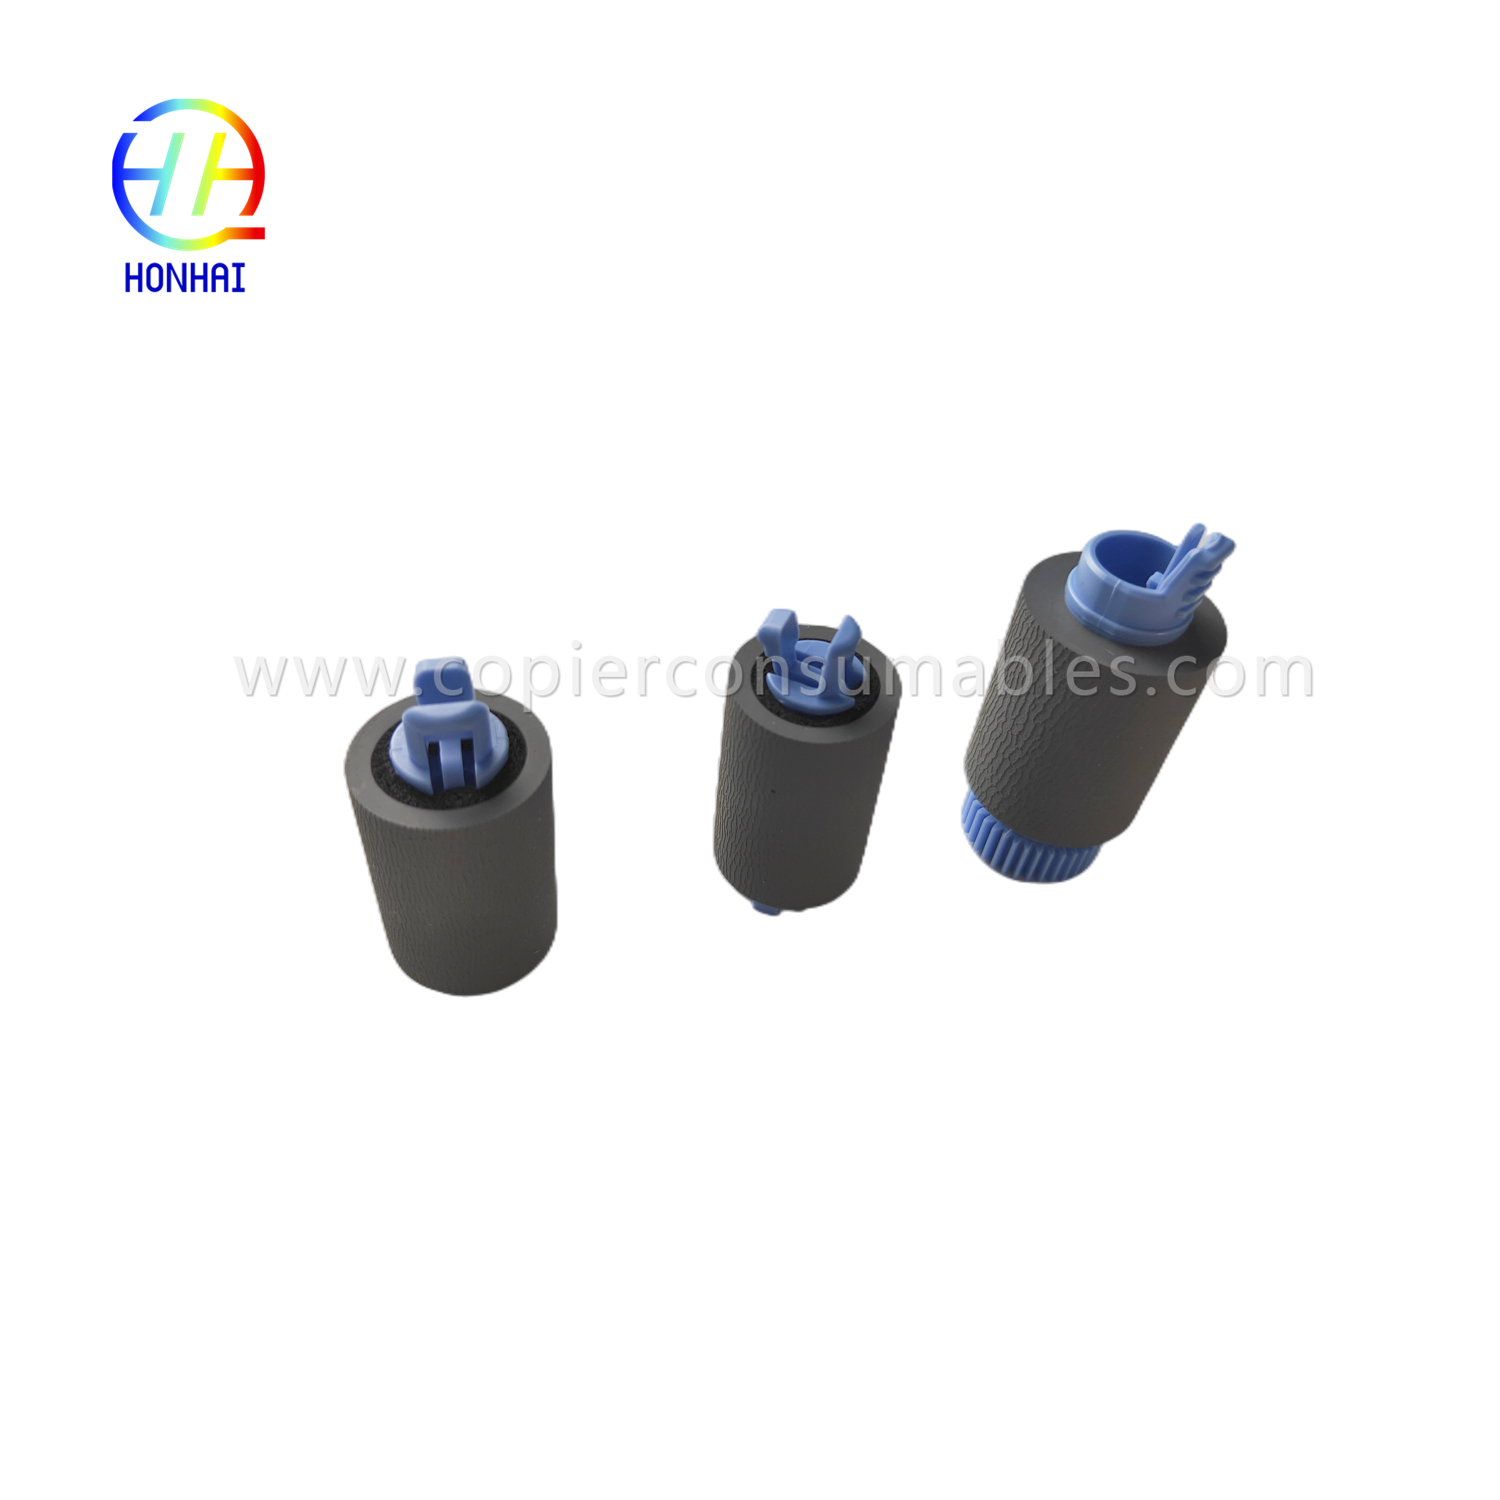 https://c585.goodao.net/tray-2-5-pickup-feed-separation-roller-set-for-hp-a7w93-67082-mfp-785f-780dn-e77650z-e77660z-e77650dn-e4767dn p77750z-p77760z-p75050dn-p75050dw-product/